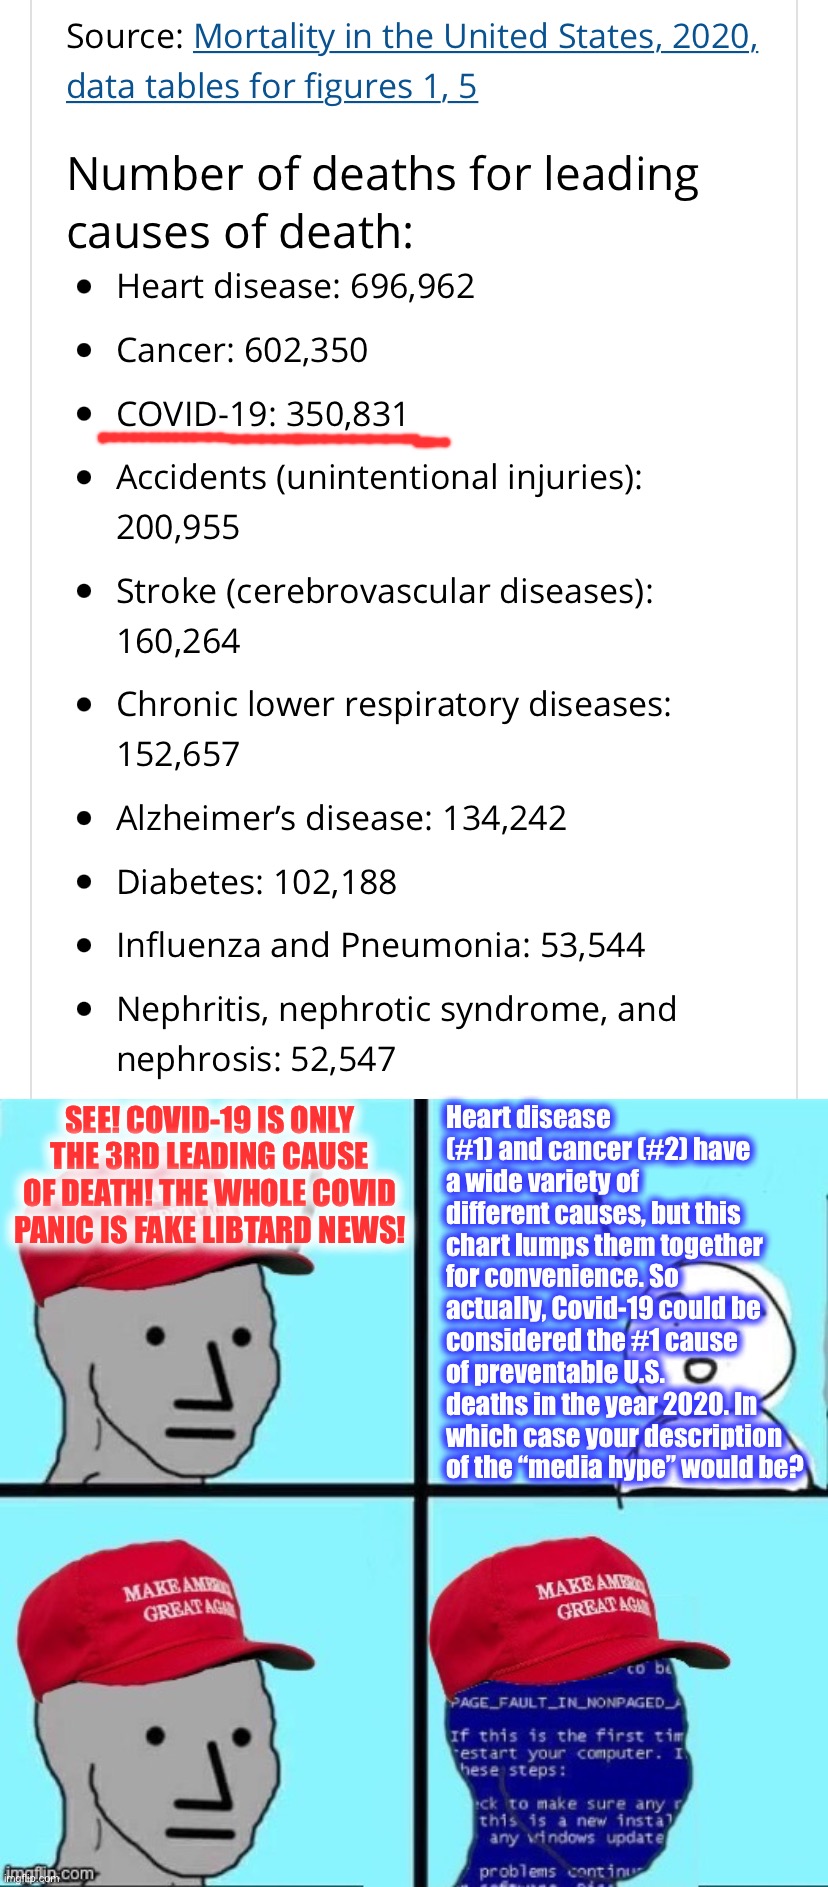 There are lies, damn lies, statistics, and the plain fact that Covid-19 killed 350,000+ in the year 2020. | Heart disease (#1) and cancer (#2) have a wide variety of different causes, but this chart lumps them together for convenience. So actually, Covid-19 could be considered the #1 cause of preventable U.S. deaths in the year 2020. In which case your description of the “media hype” would be? SEE! COVID-19 IS ONLY THE 3RD LEADING CAUSE OF DEATH! THE WHOLE COVID PANIC IS FAKE LIBTARD NEWS! | image tagged in covid-19 3rd leading cause of death in u s,npc maga blue screen fixed textboxes,covid-19,covid19,covidiots,conservative logic | made w/ Imgflip meme maker